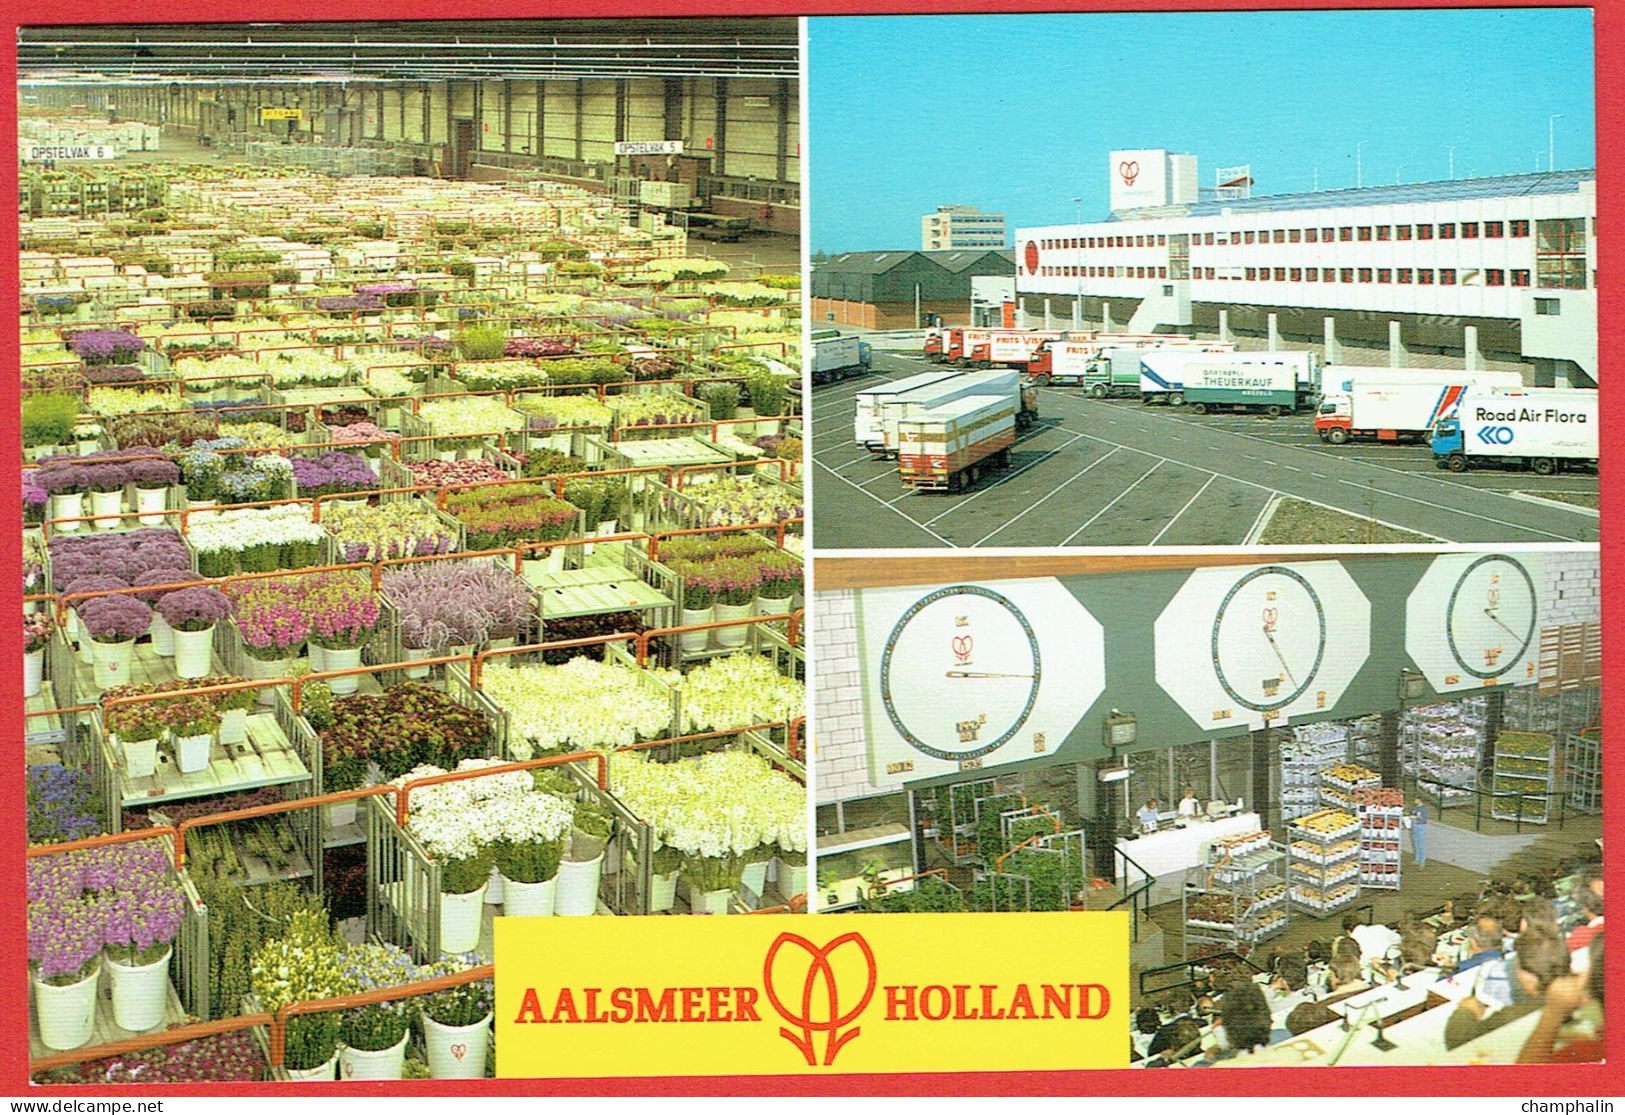 Aalsmeer - World Flower Centre - Vues Diverses Cutflower Expedition Auction - Horticulture Marché Aux Fleurs Grossiste - Aalsmeer